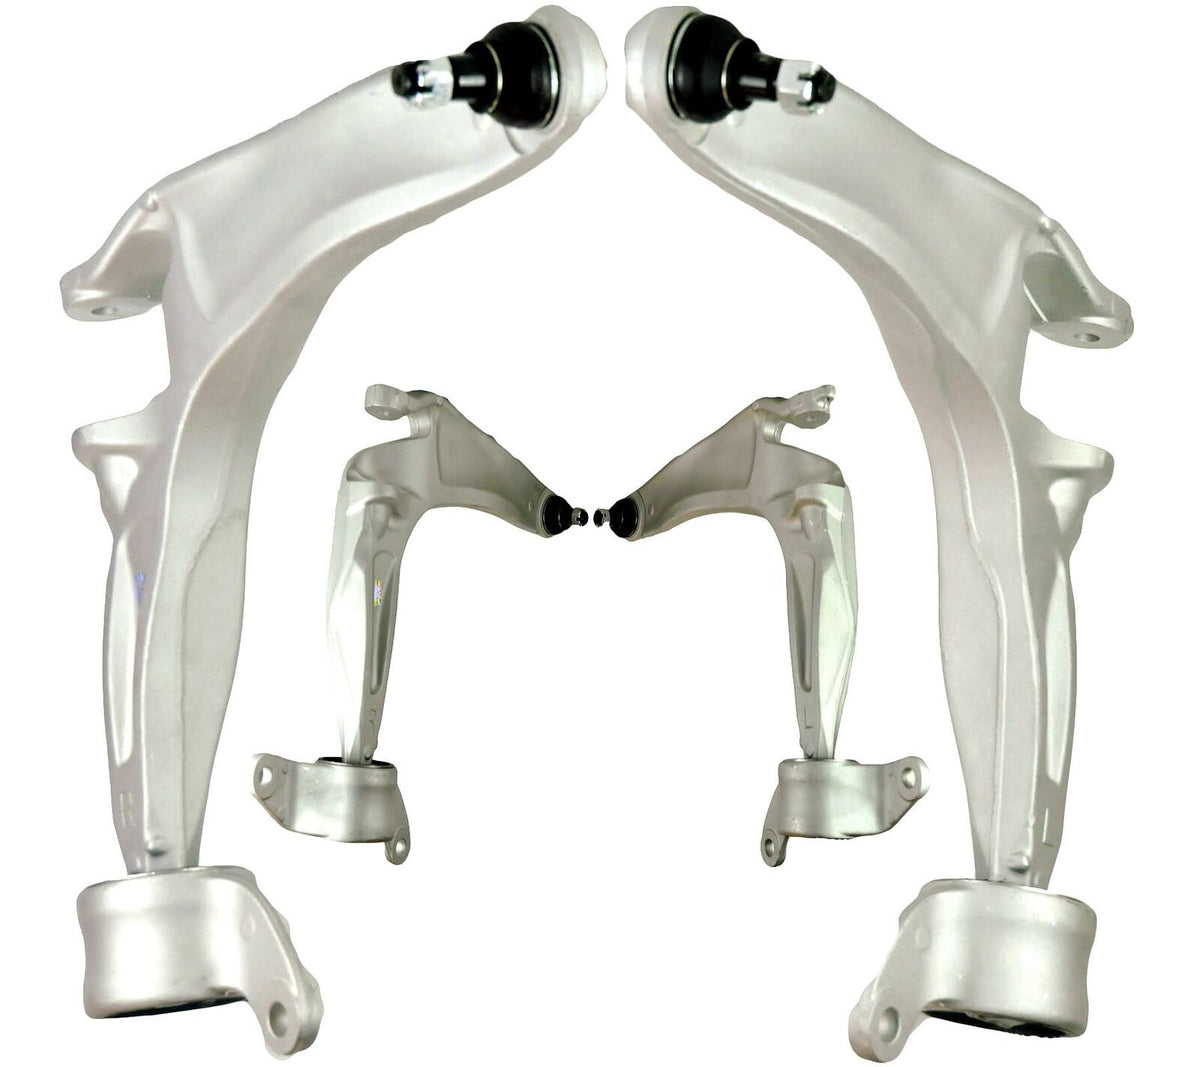 Pair Of Front Lower Suspension Wishbone Track Control Arms For Honda Civic Mk8 (2005-2016)